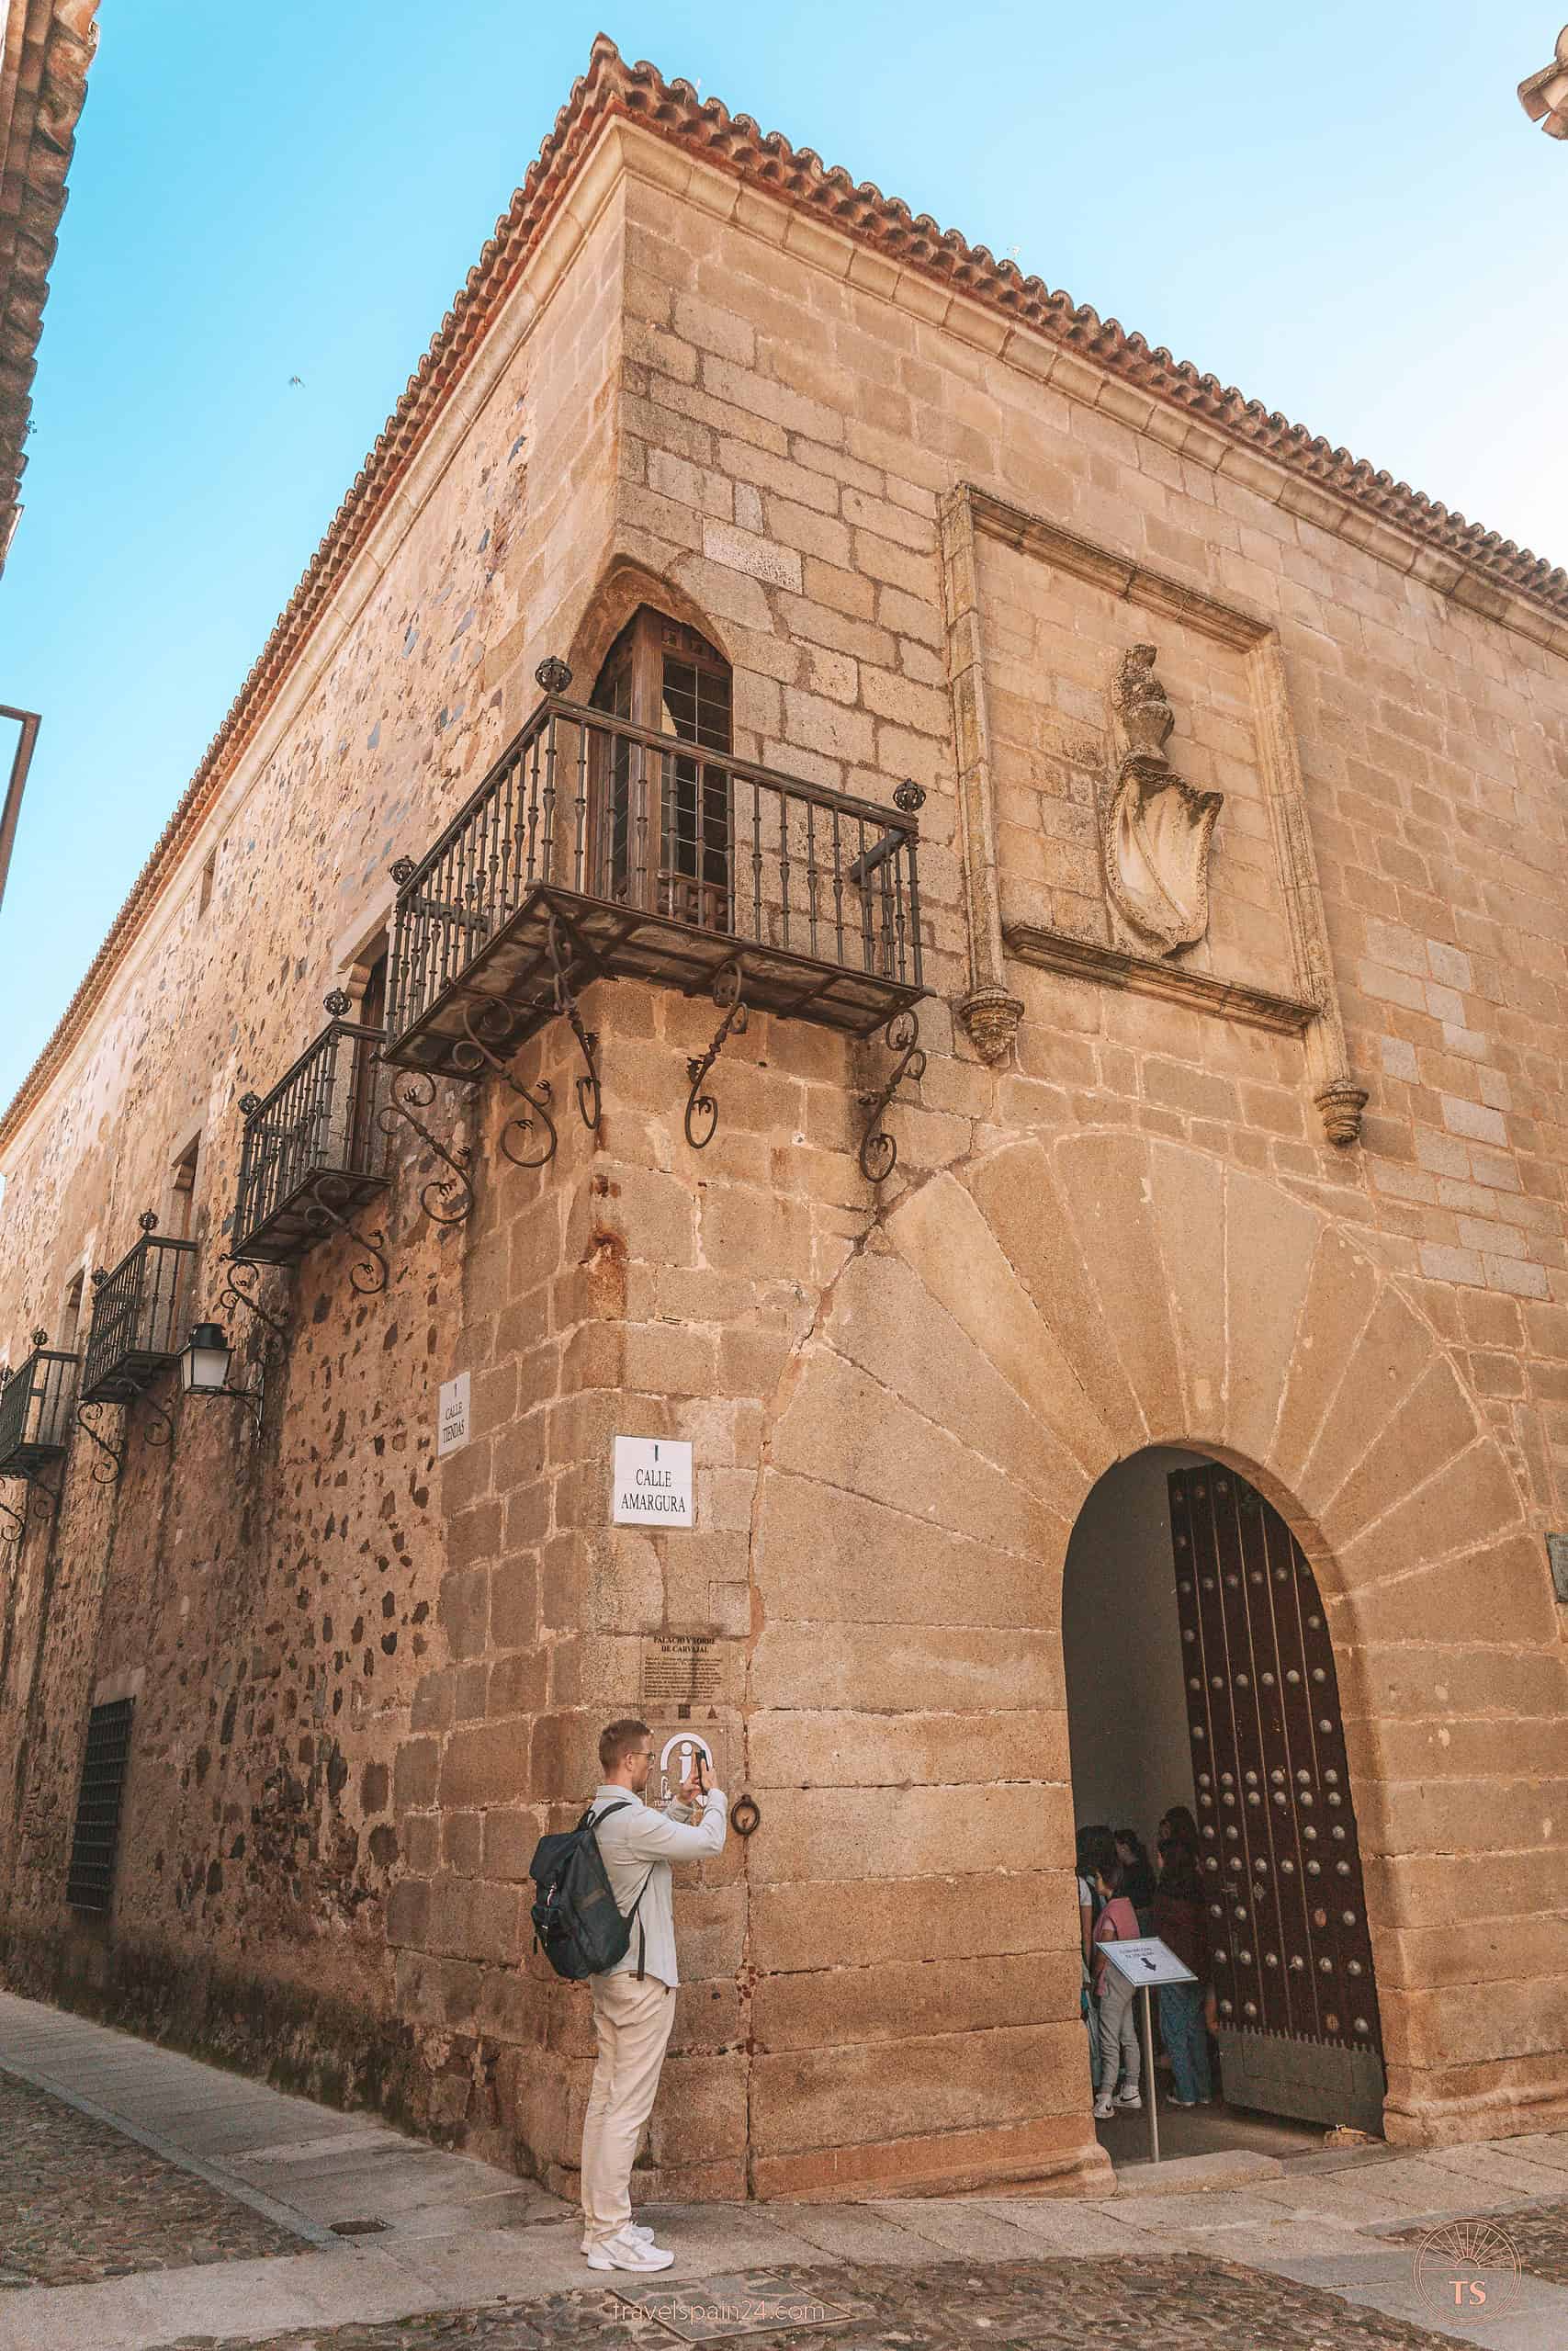 Timon van Basten at Casa del Mono o de los Cáceres-Nidos in Cáceres, capturing the scene next to a large arched entrance, with the street sign visible above.